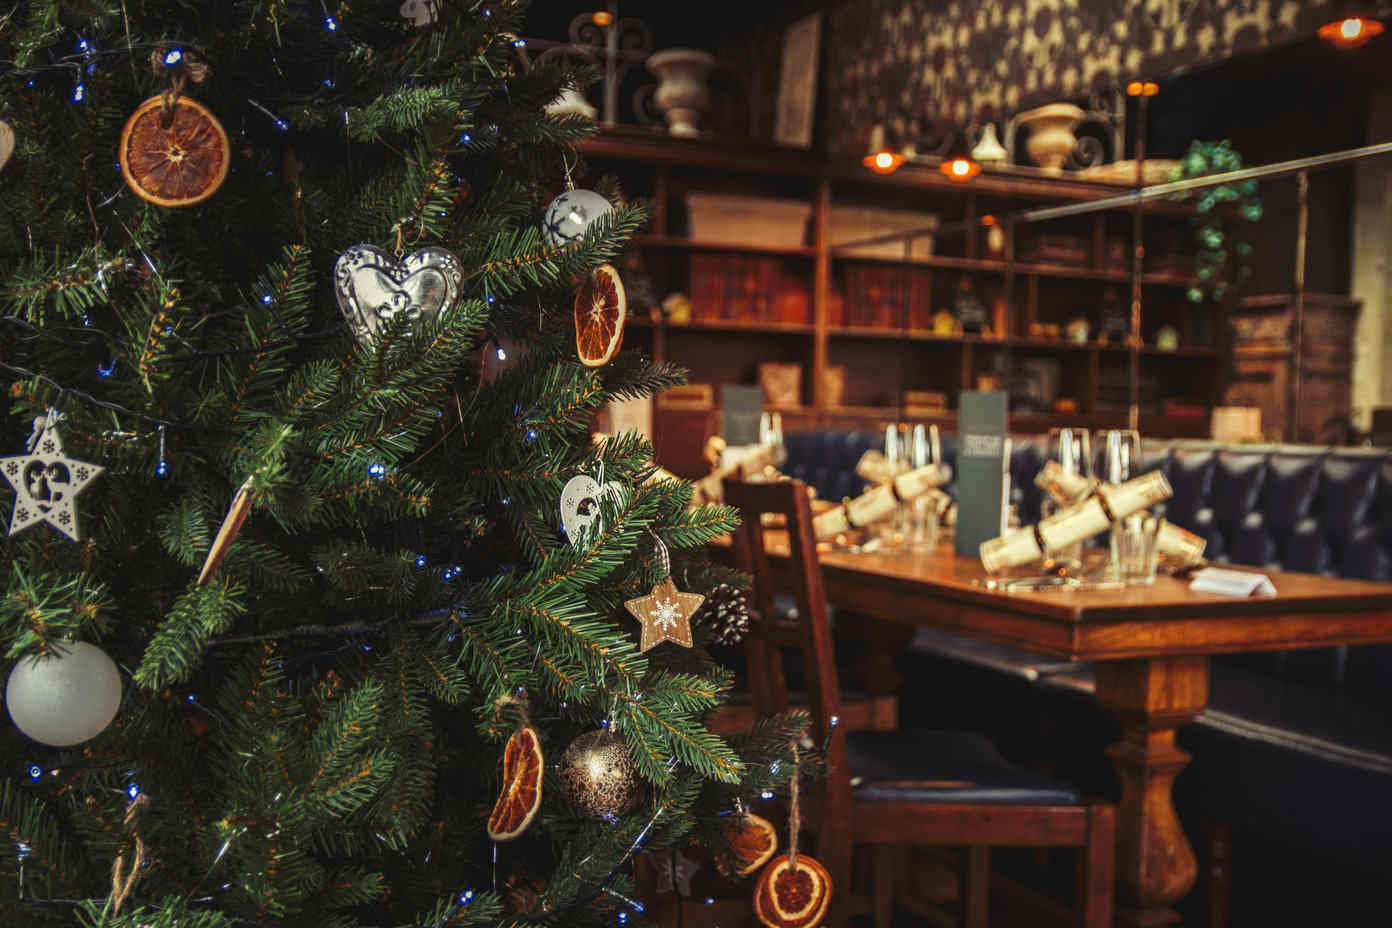 Some 64% of UK consumers say they visit pubs over Christmas while 23% visit ‘bars’.